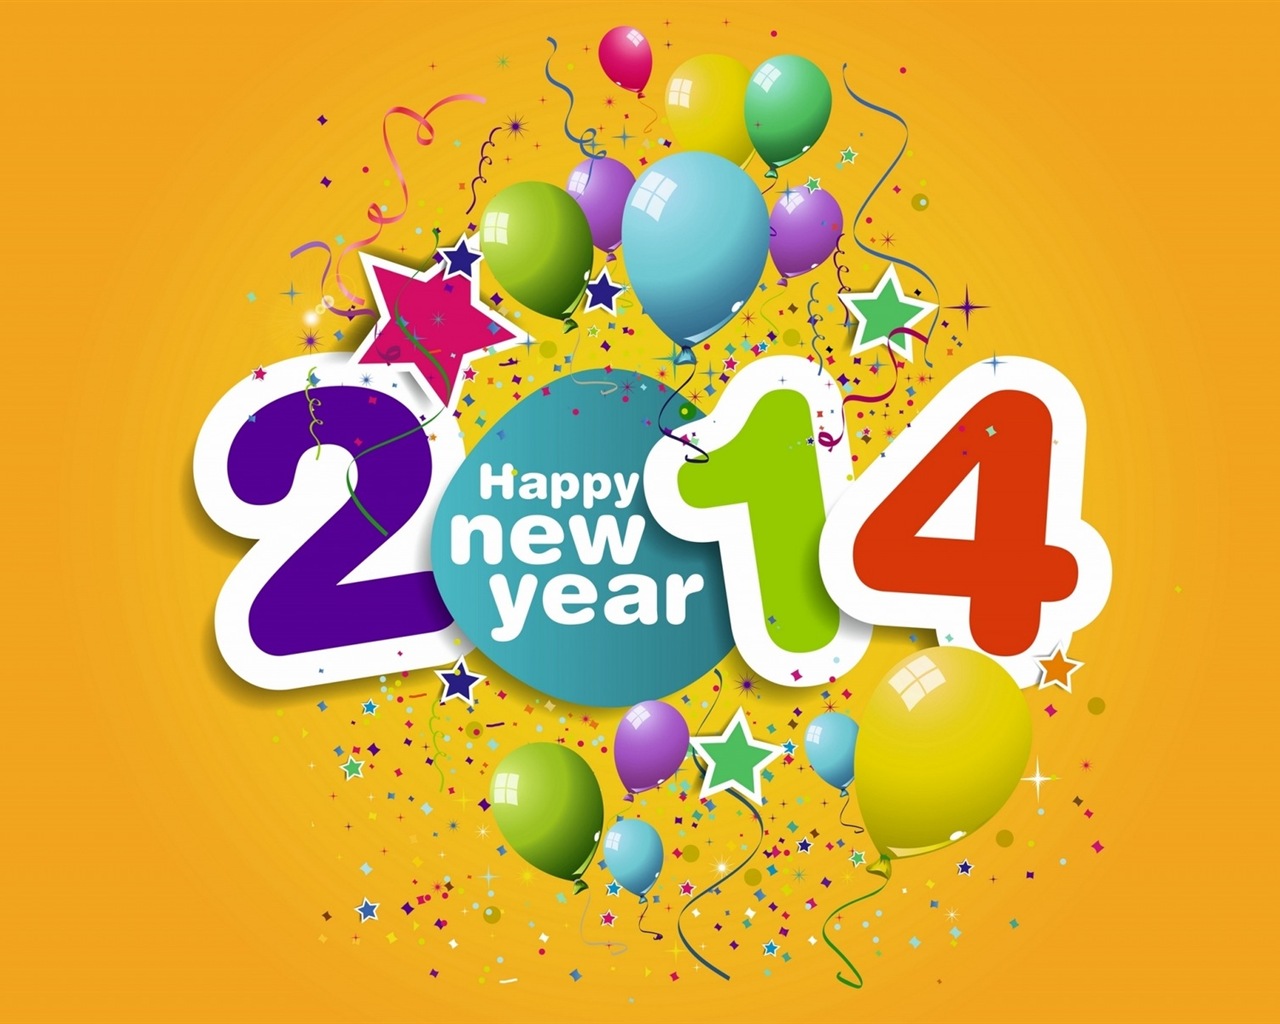 2014 New Year Theme HD Wallpapers (1) #20 - 1280x1024